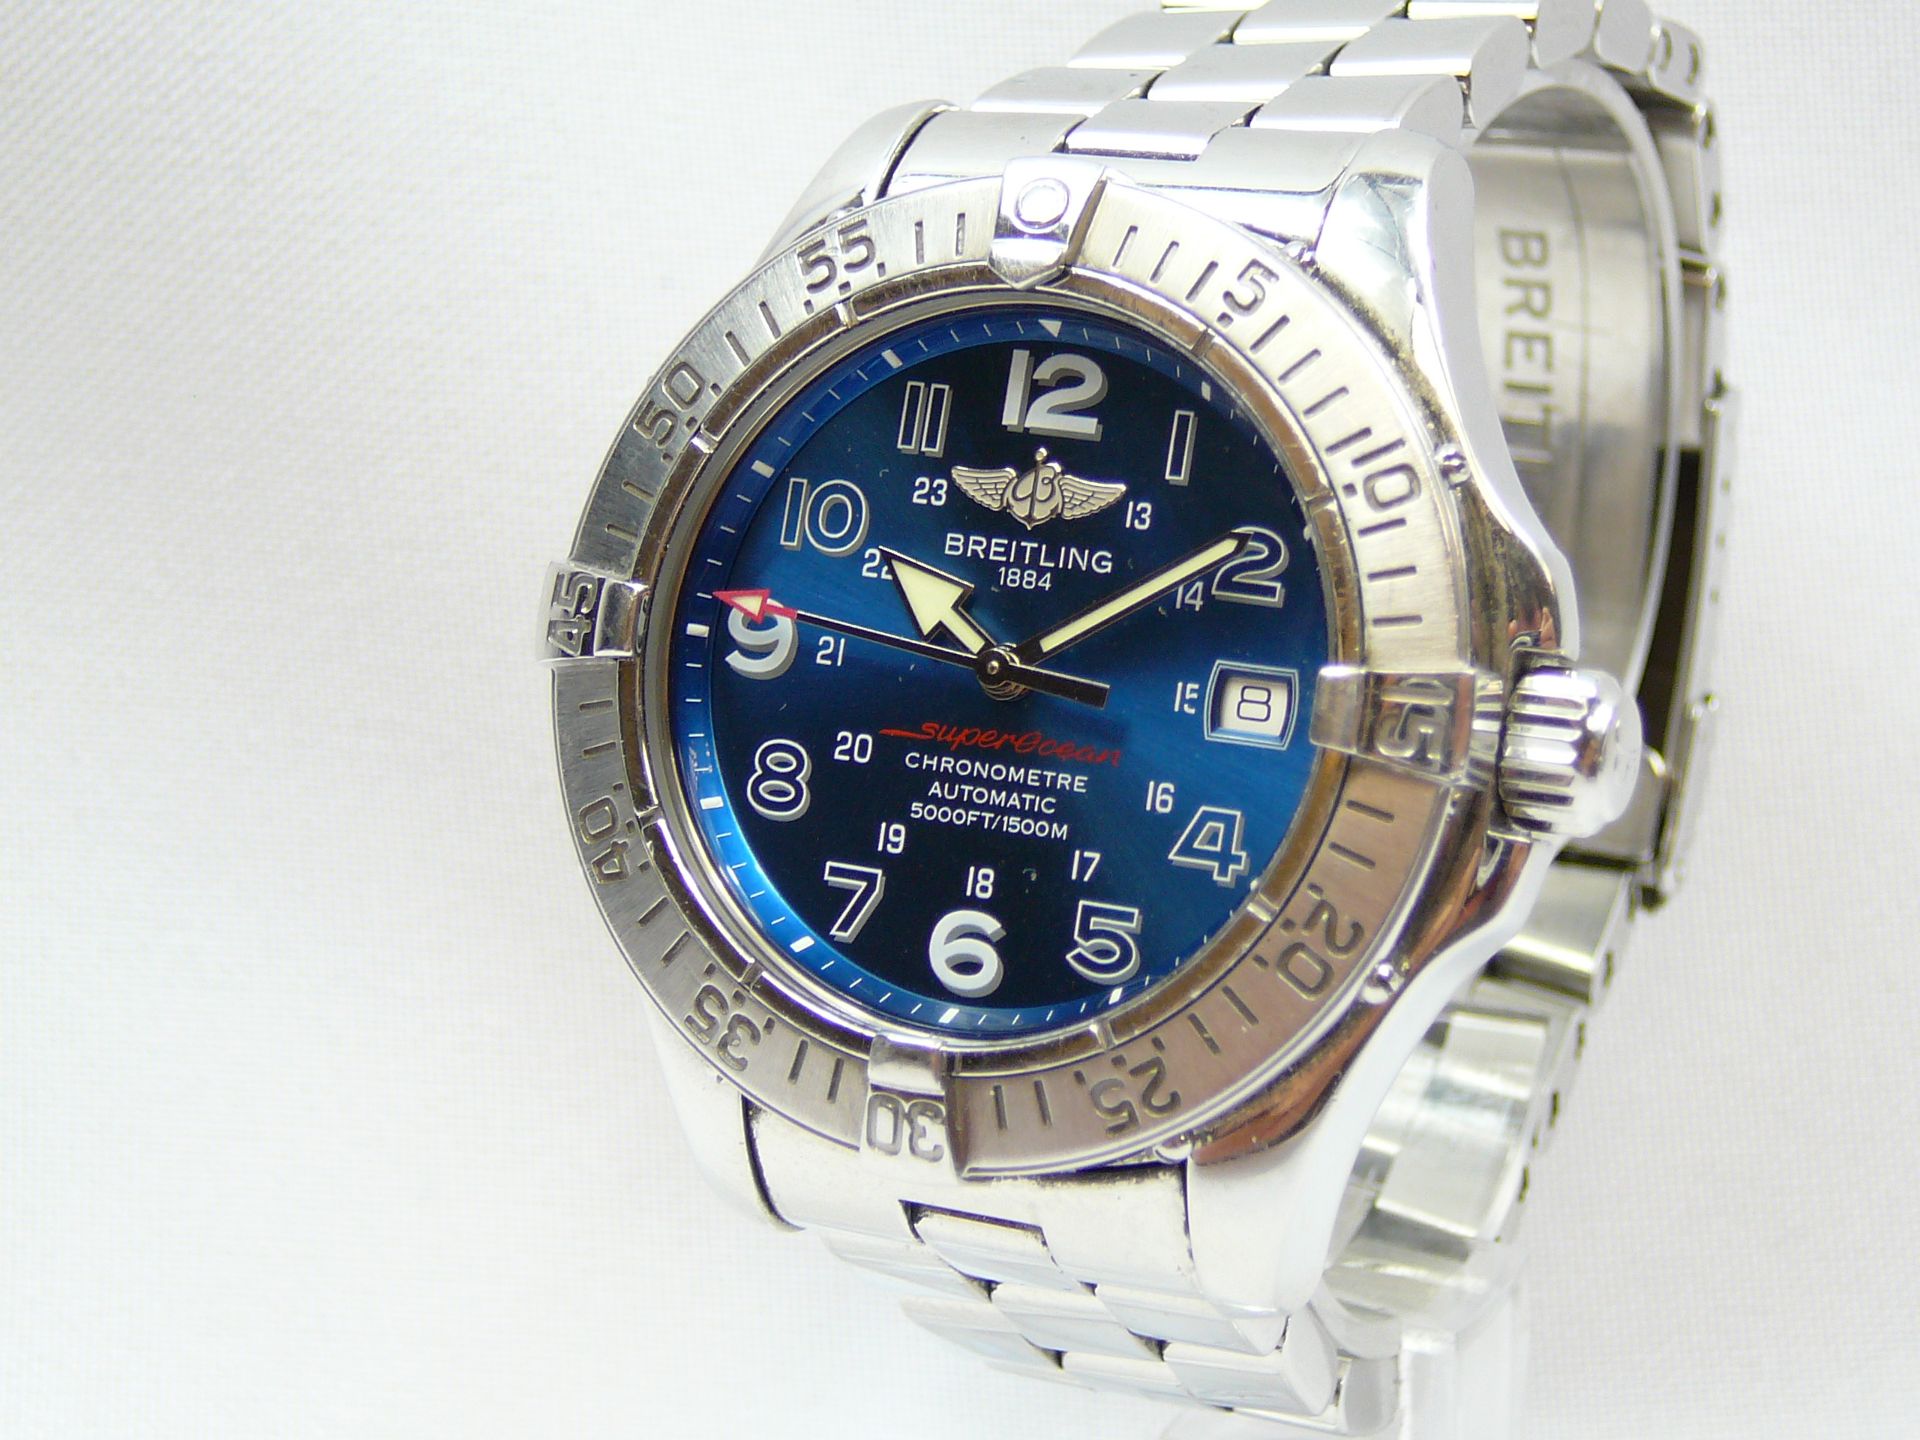 Gents Breitling Wristwatch - Image 2 of 3